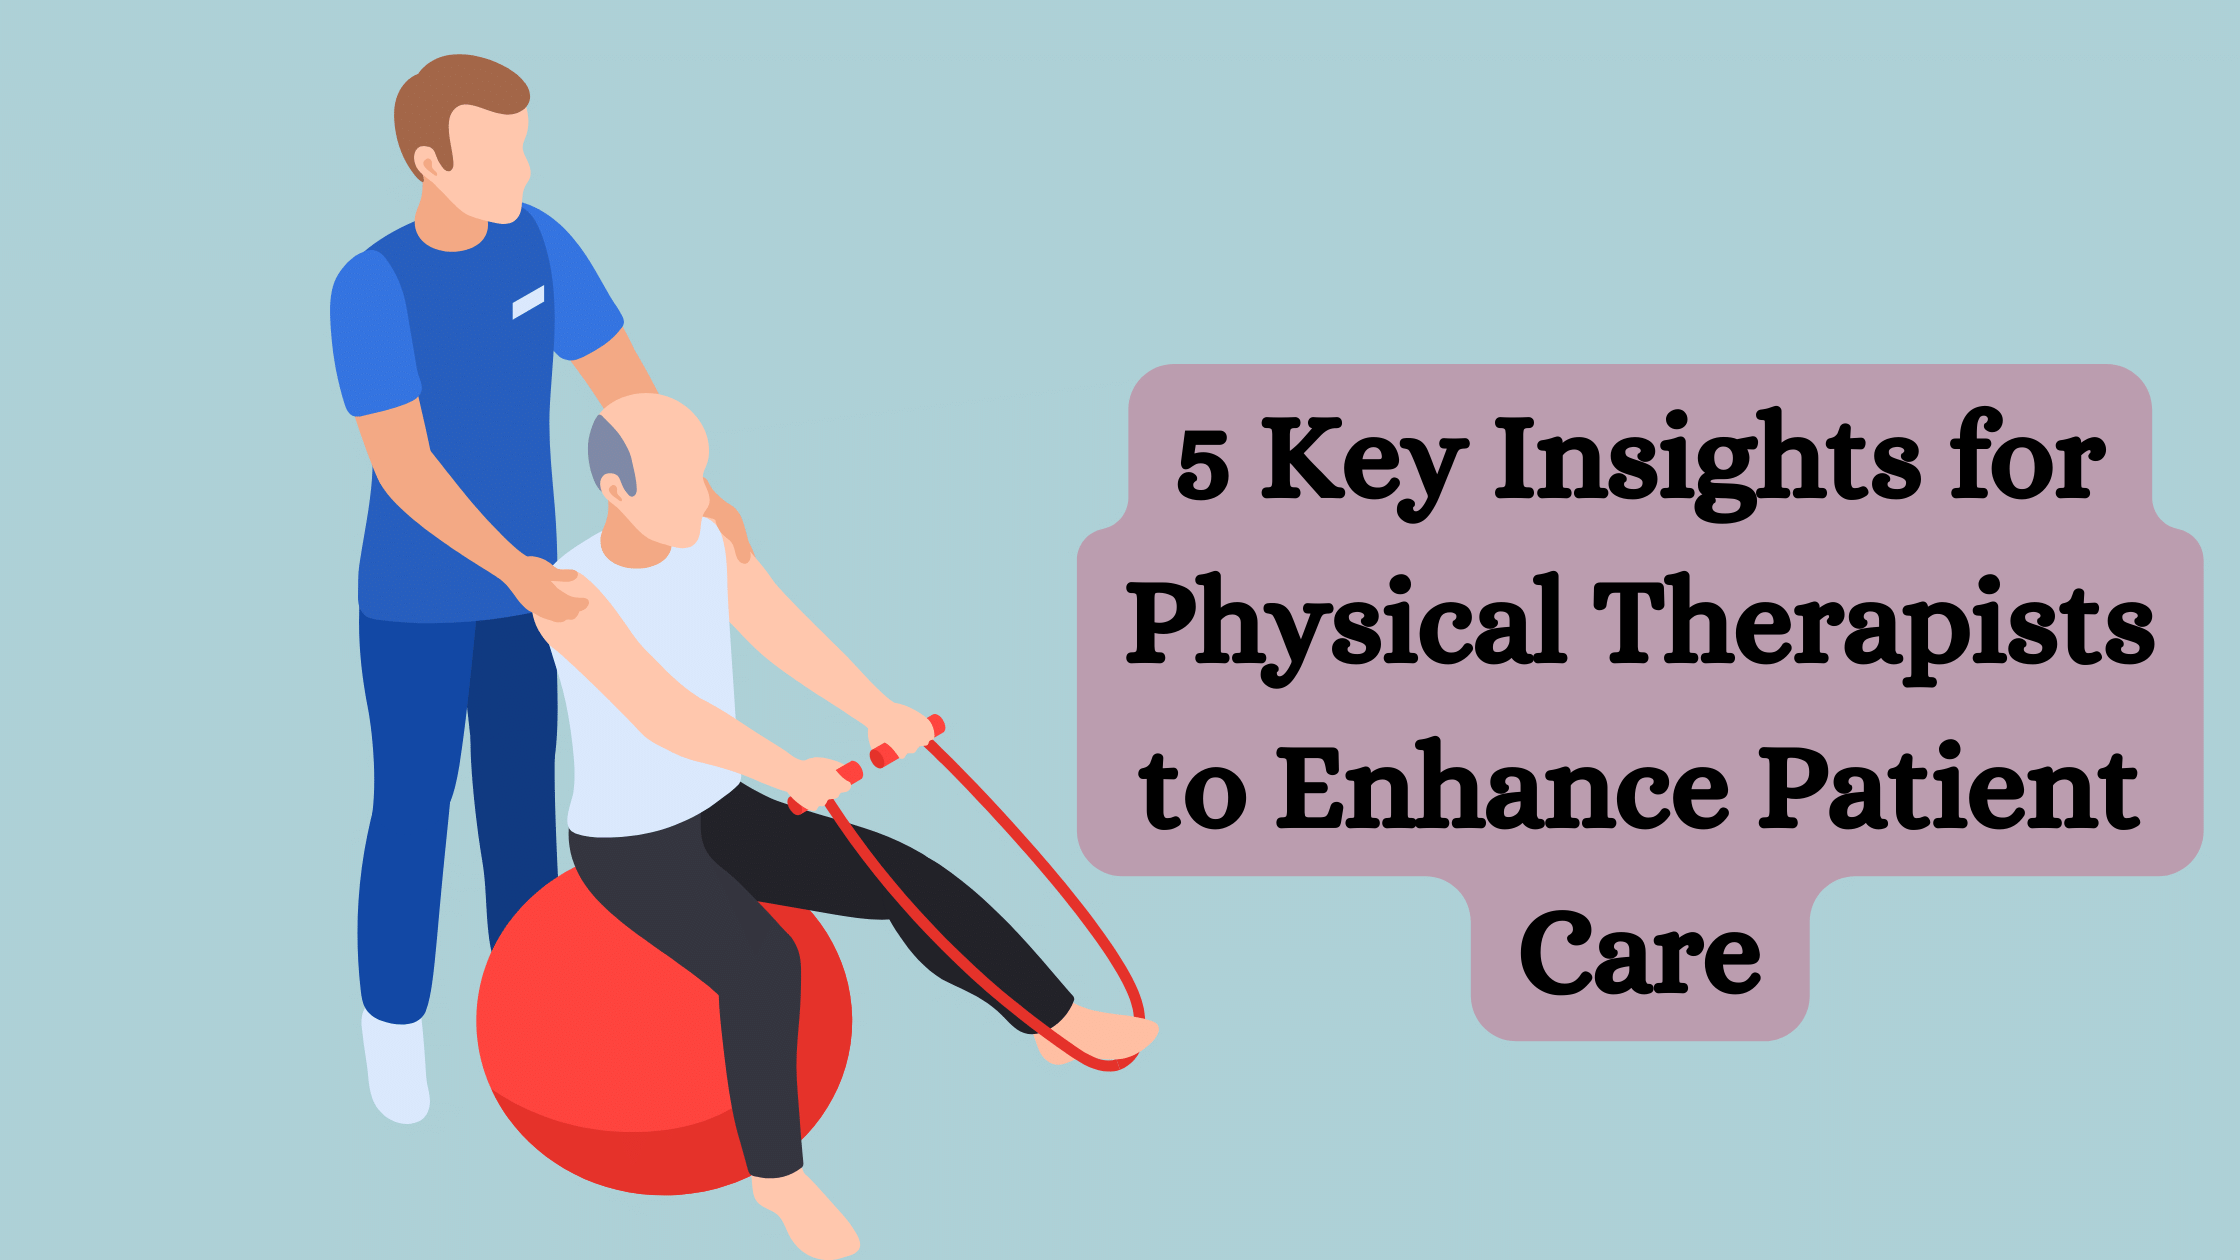 Key Insights for Physical Therapists to Enhance Patient Care